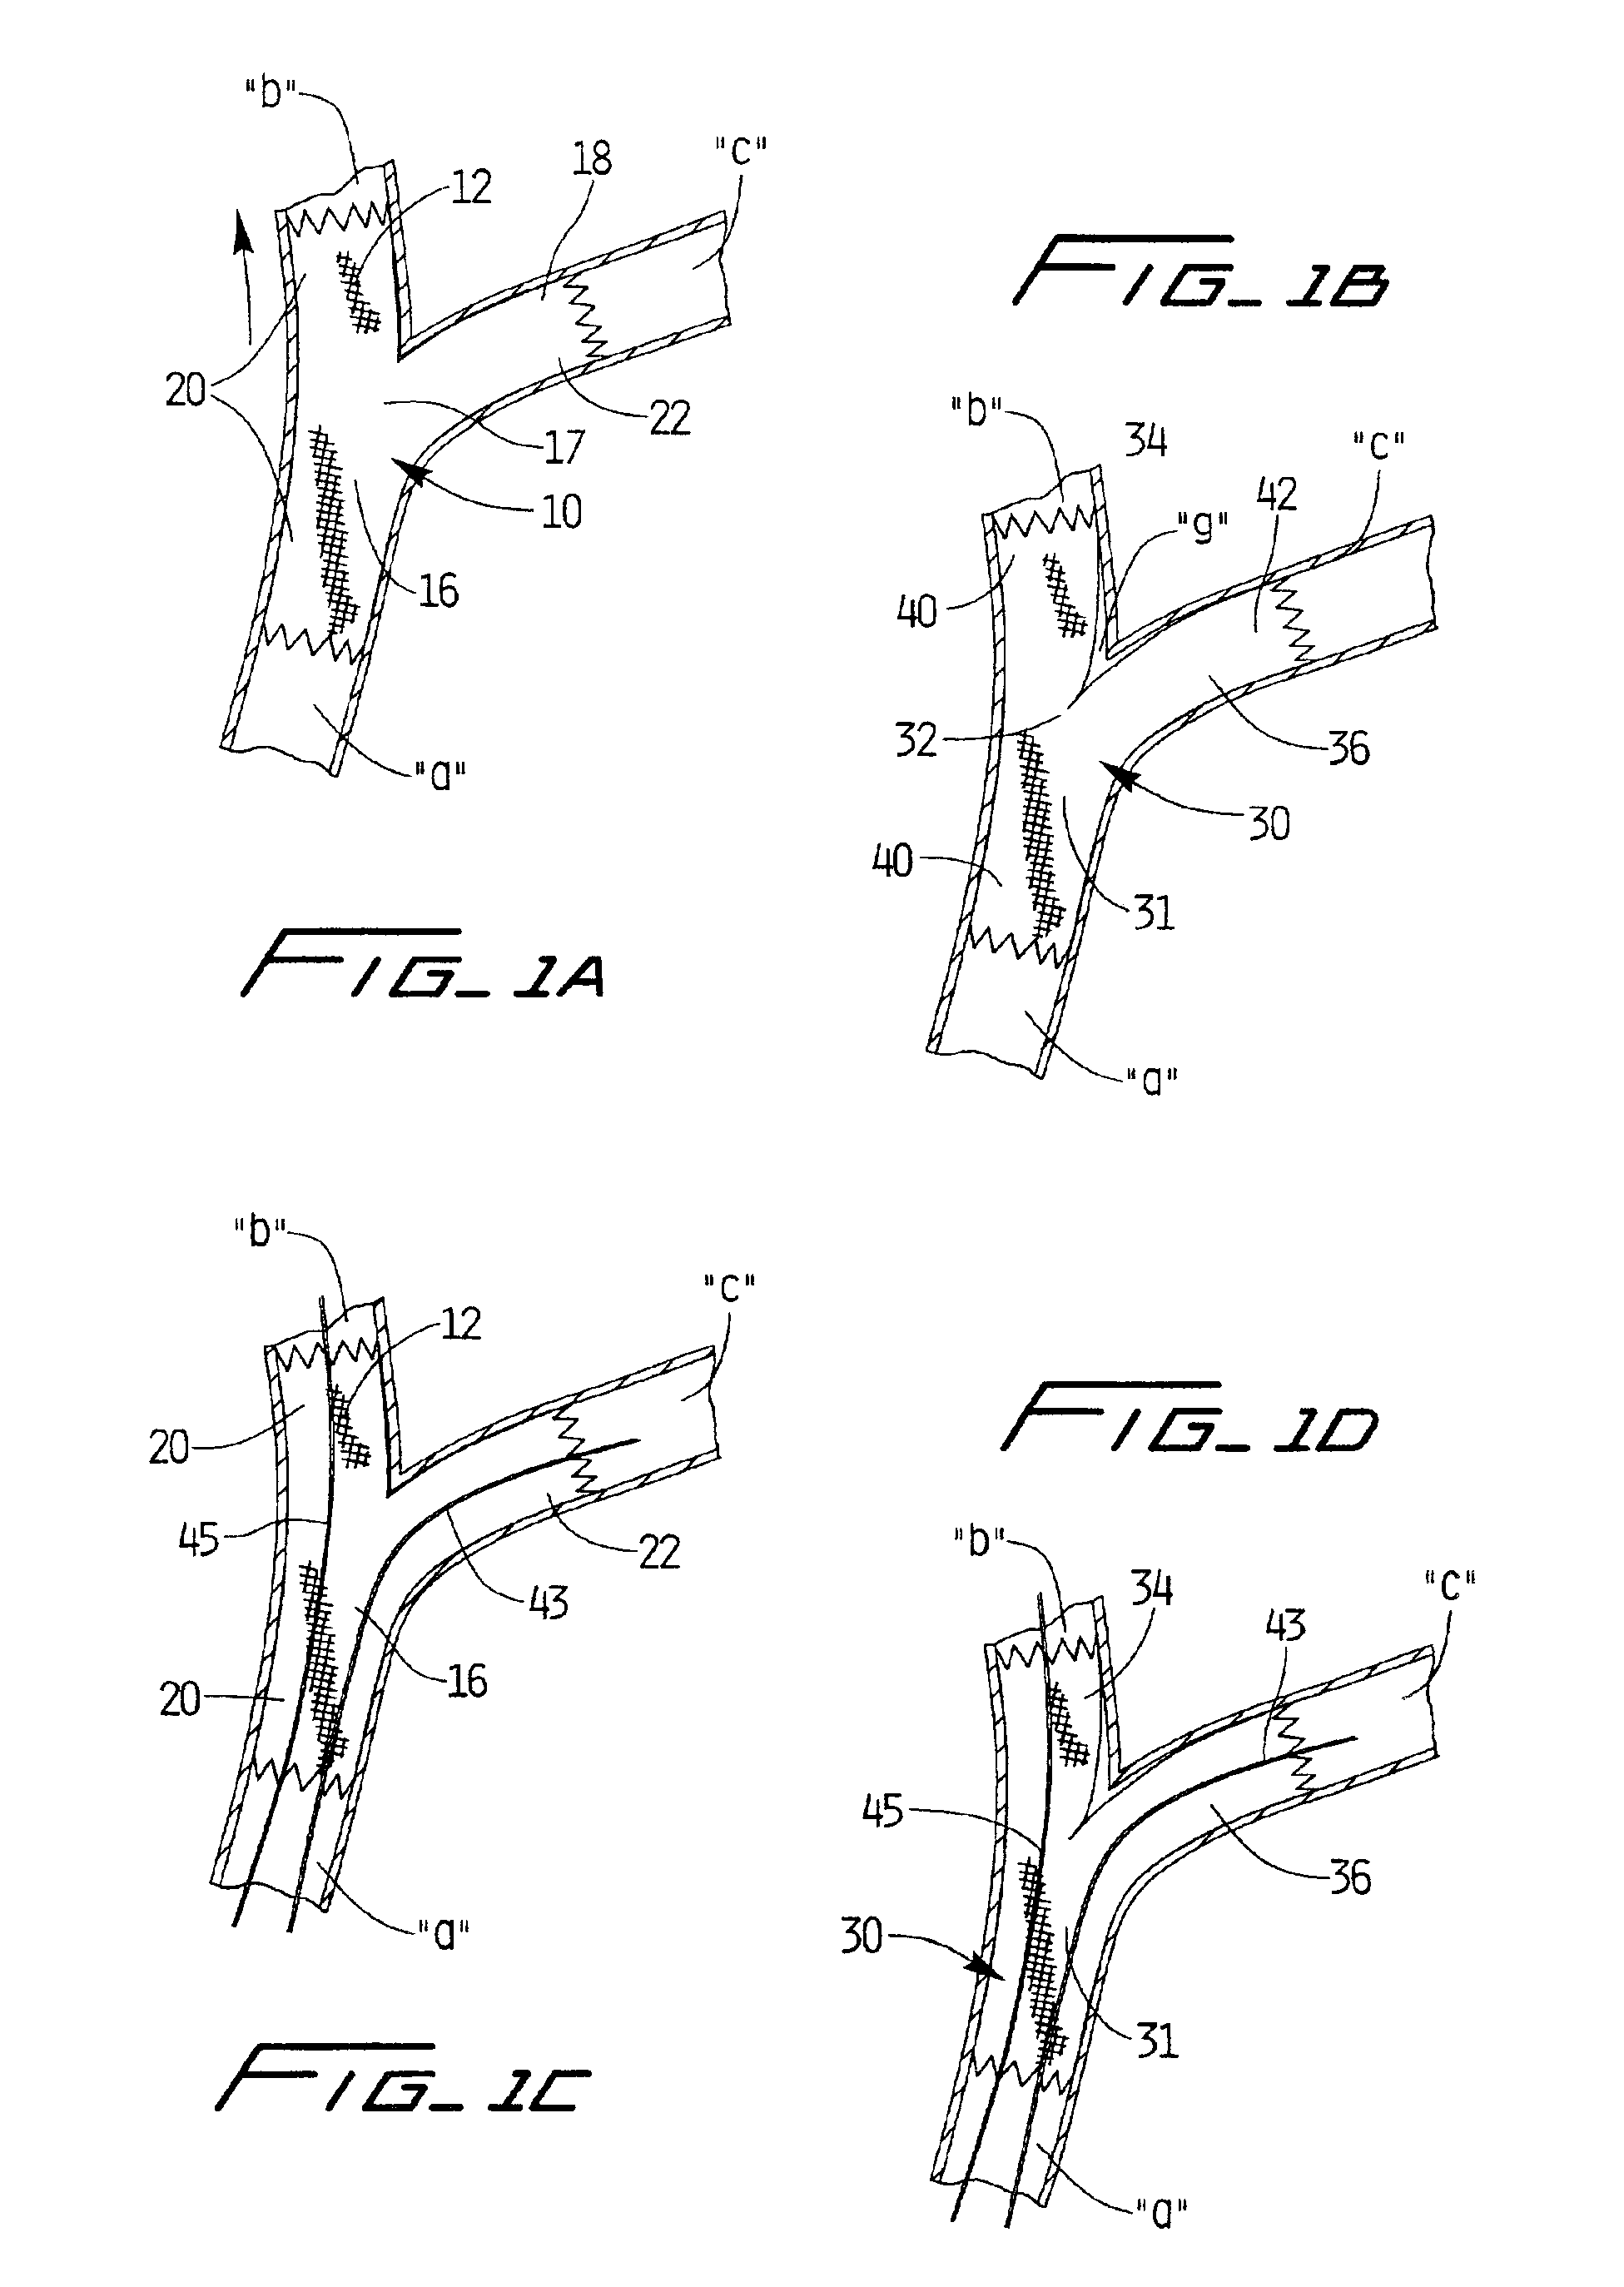 Methods of implanting covered stents with side branch